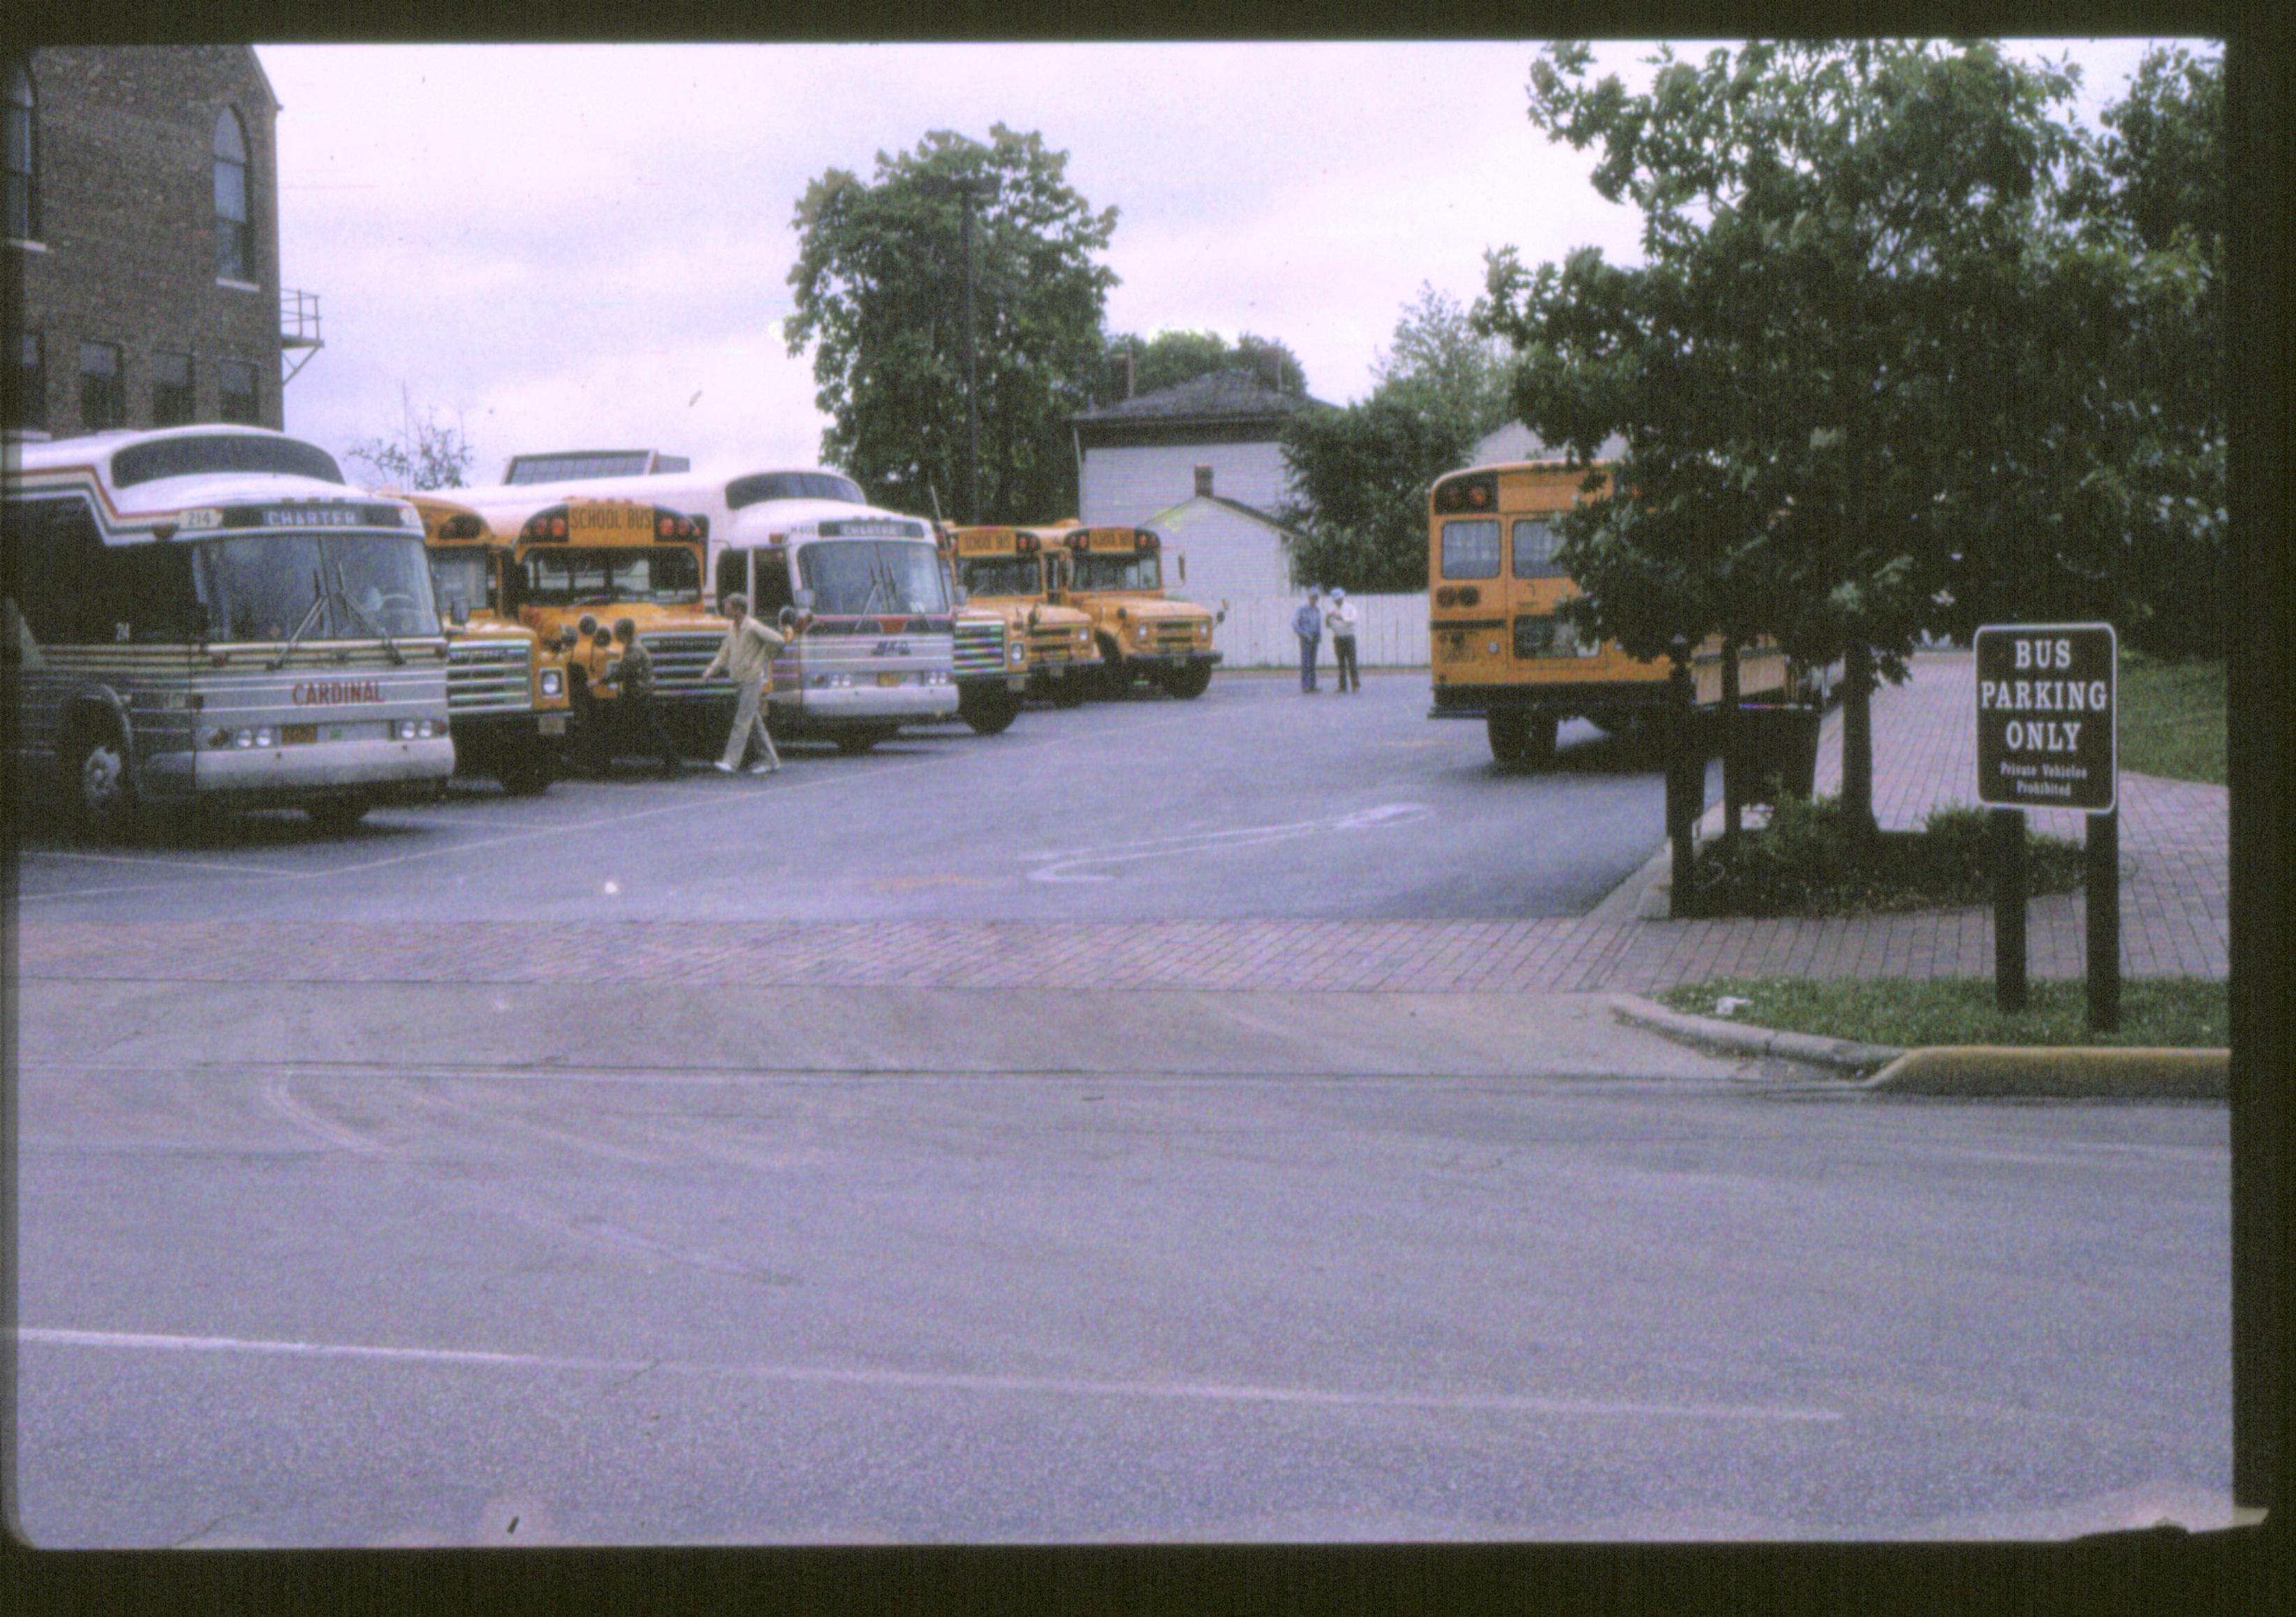 Parking lots - Bus parking lot, Grace Lutheran Church on left, Beedle House in background looking East bus, parking lot, Grace Lutheran Church, Beedle